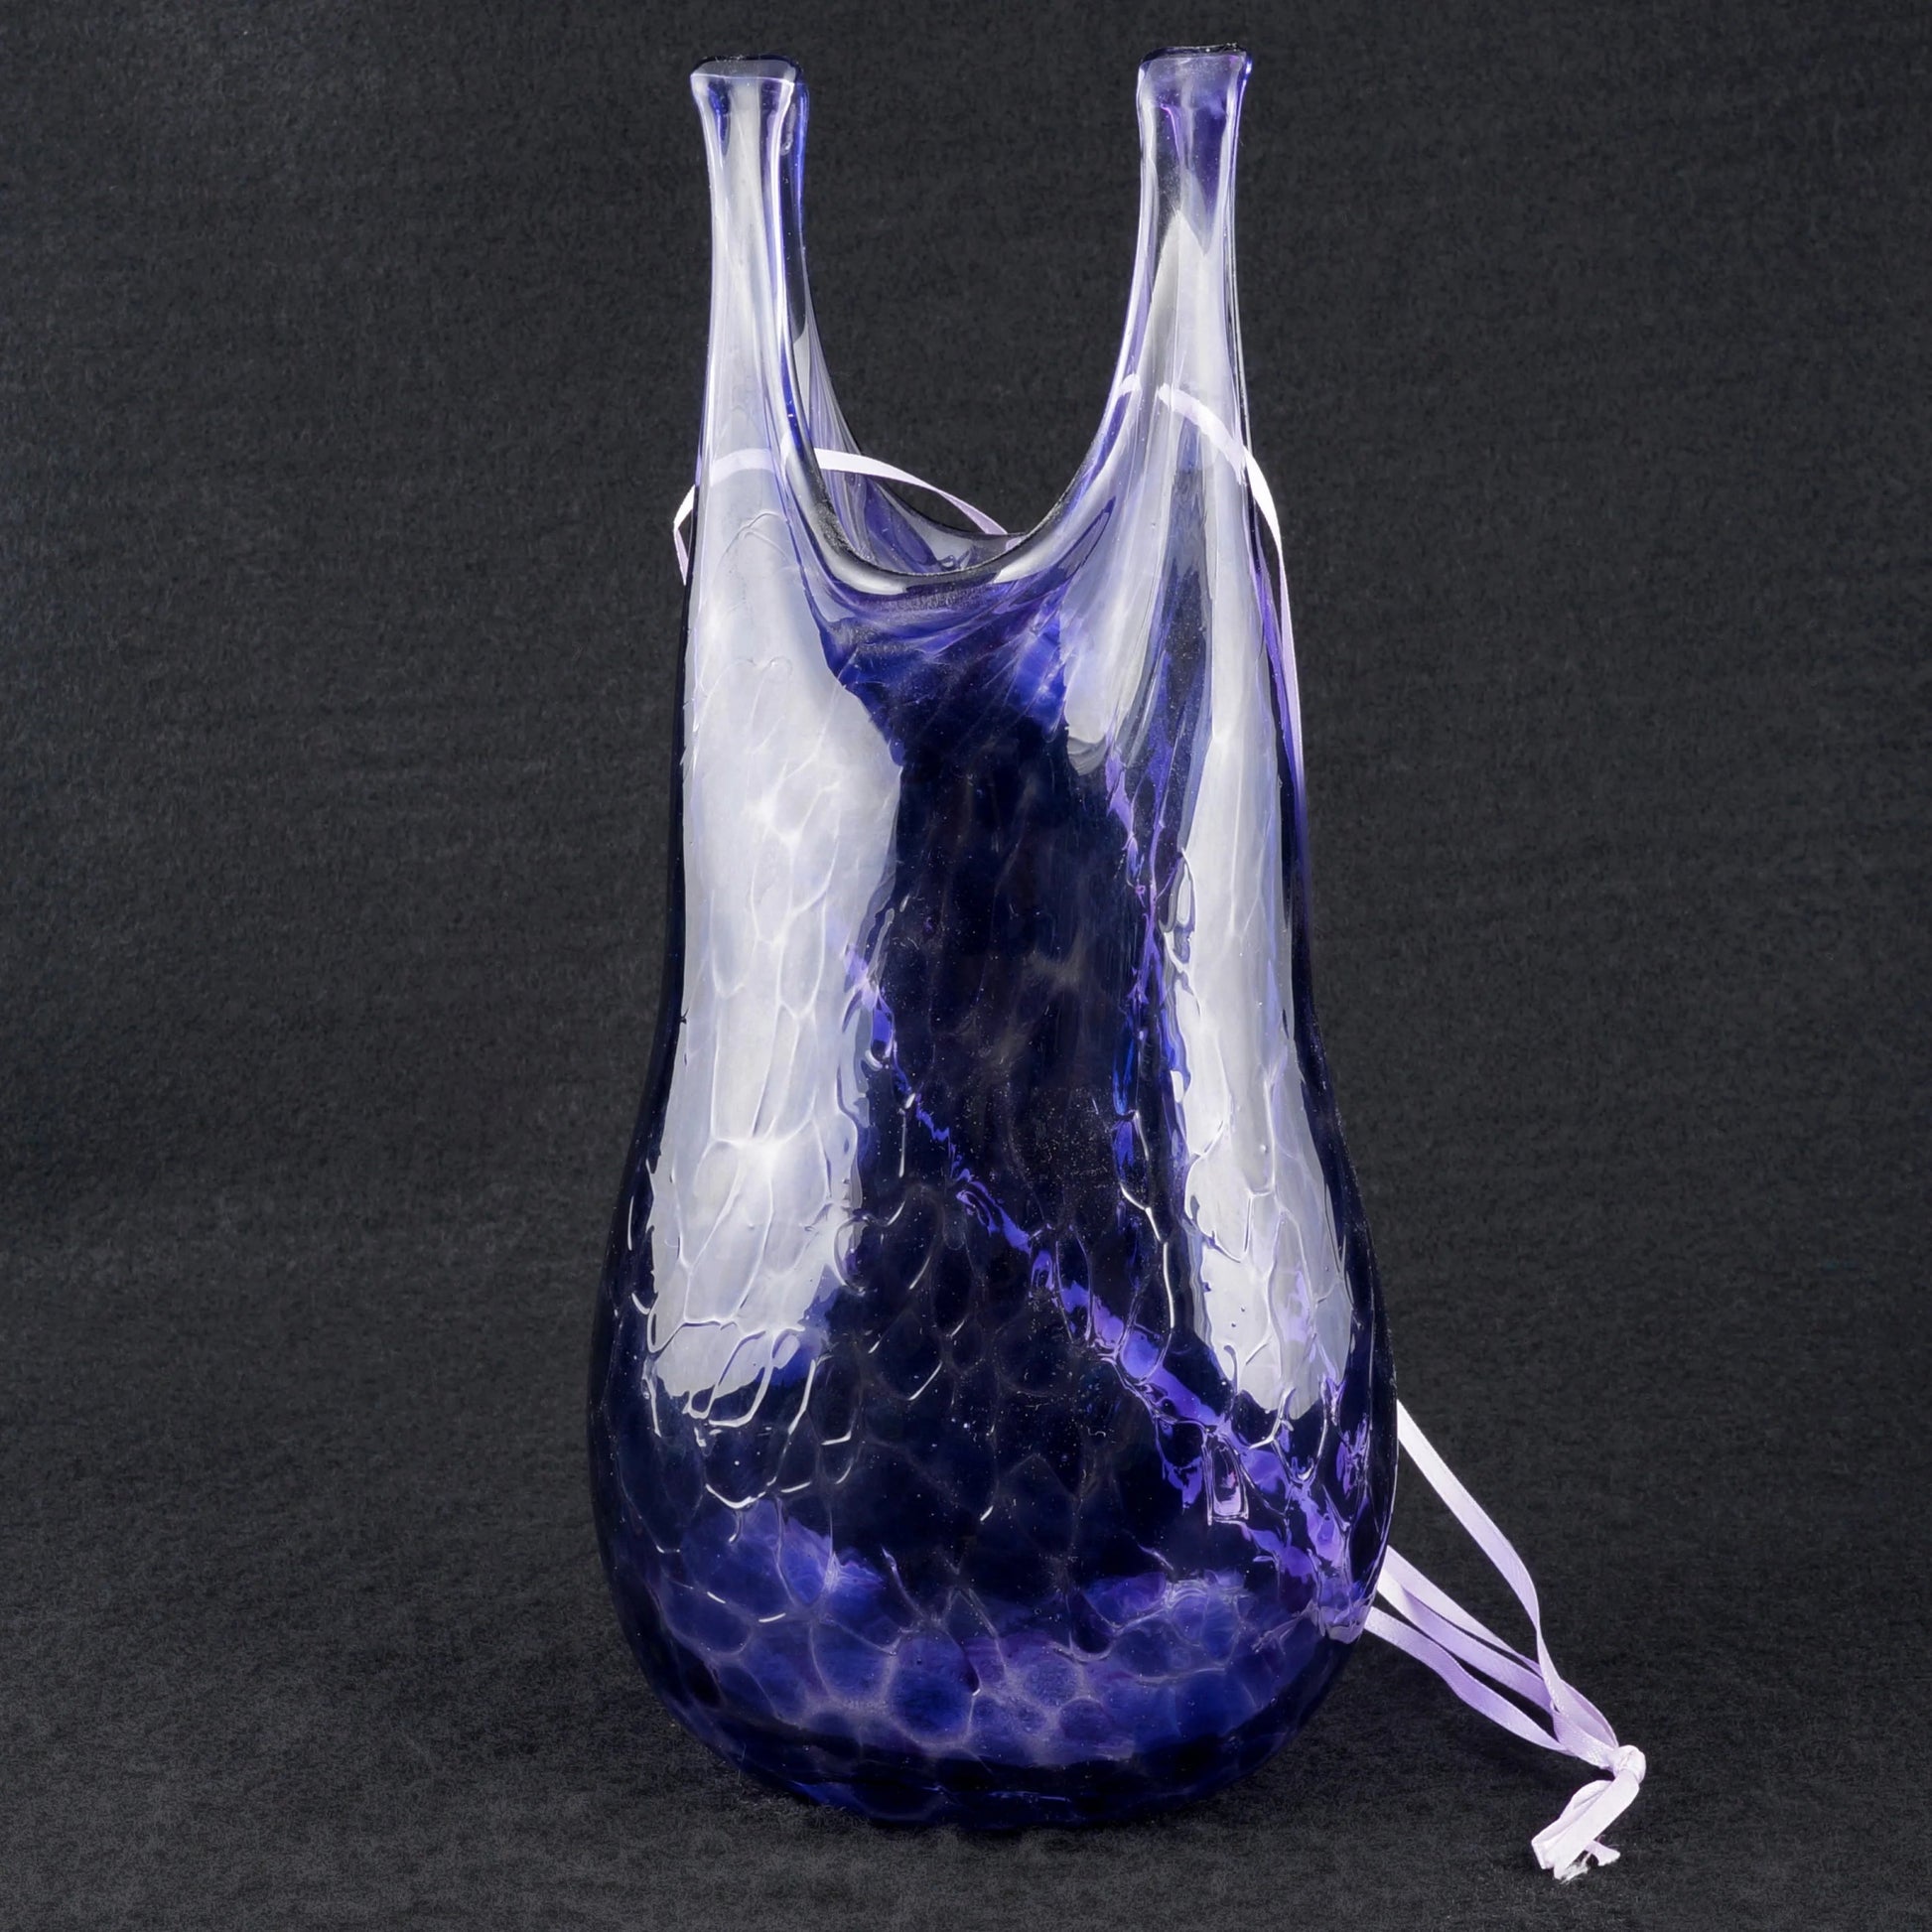 Blown Art Glass Hanging Vase Purple Signed By Artist 9” 2004 - Bear and Raven Antiques